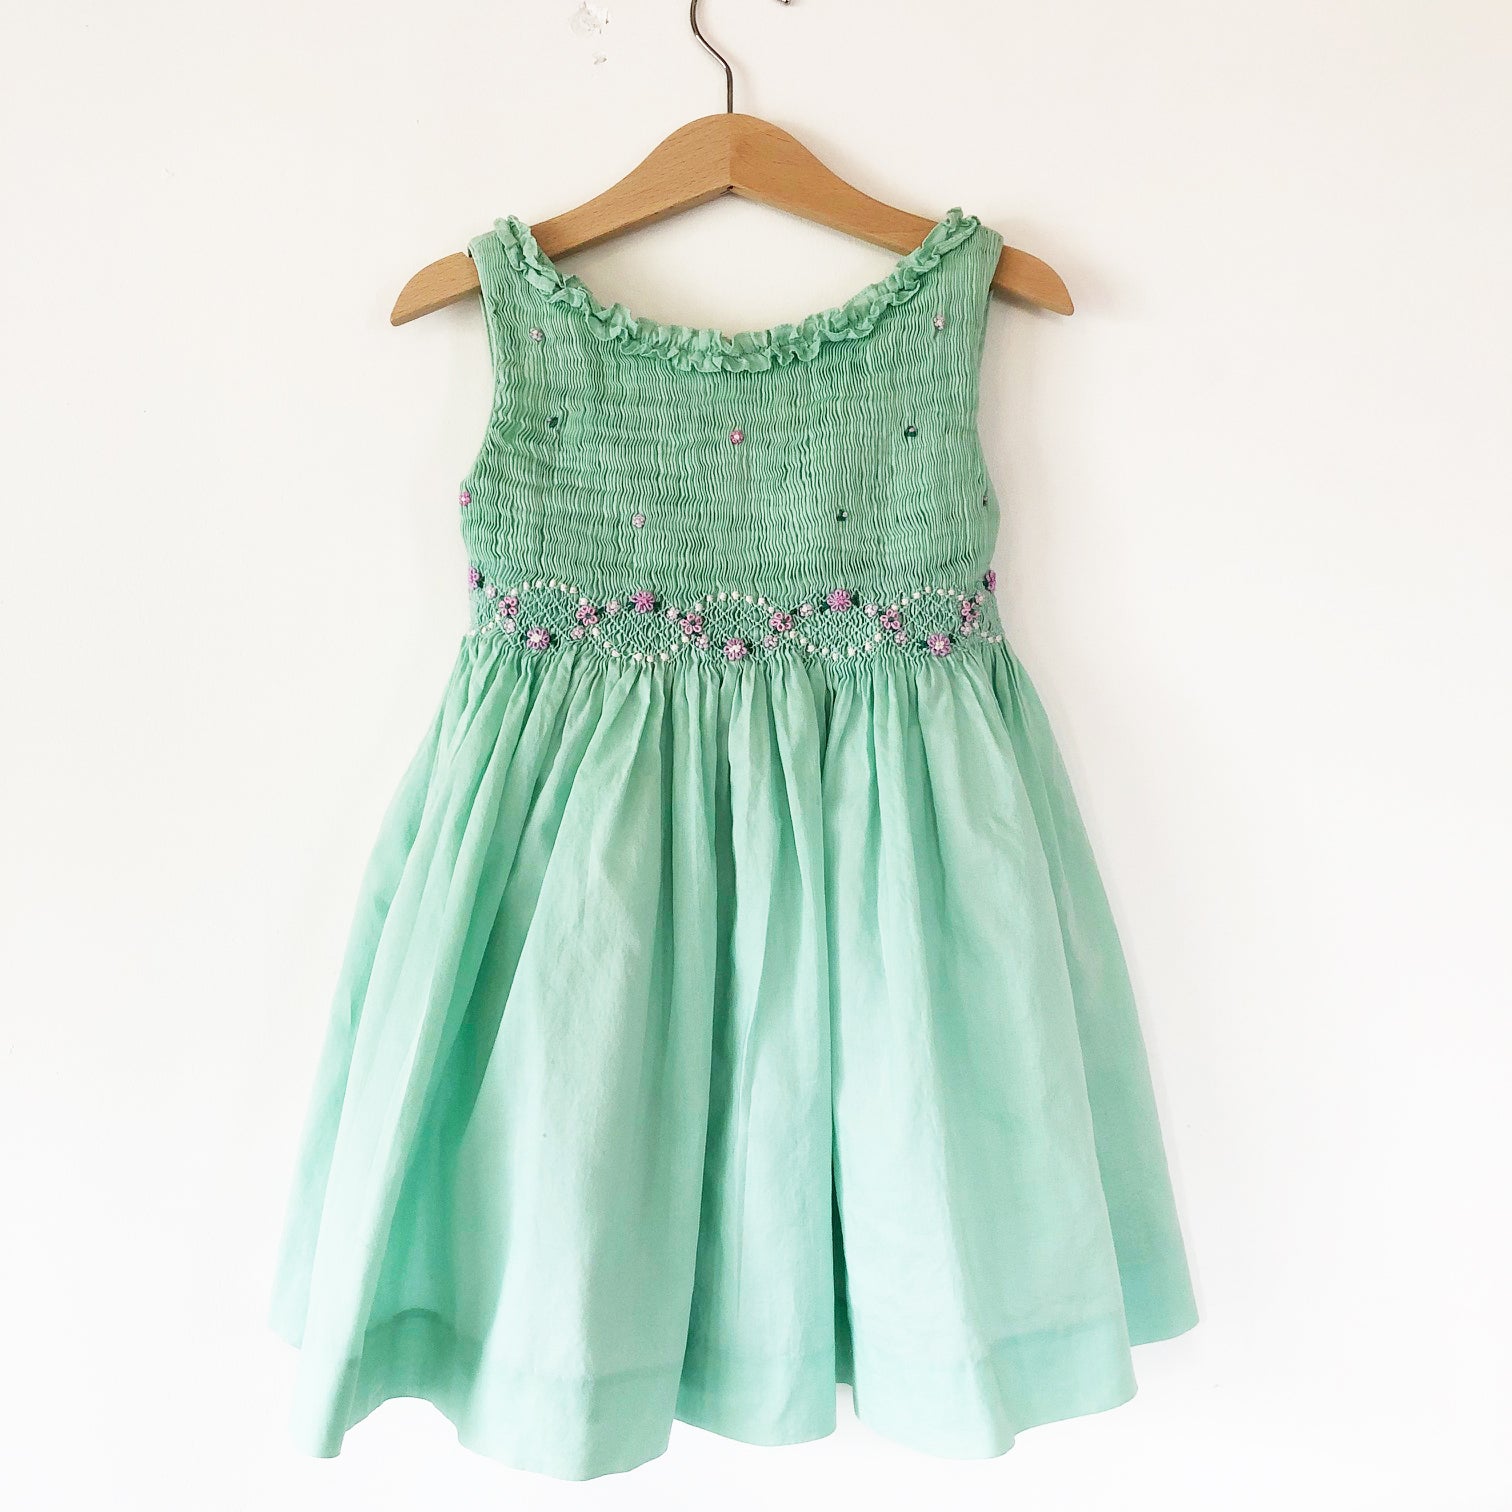 The perfect Smocked green dress size 2T-3T